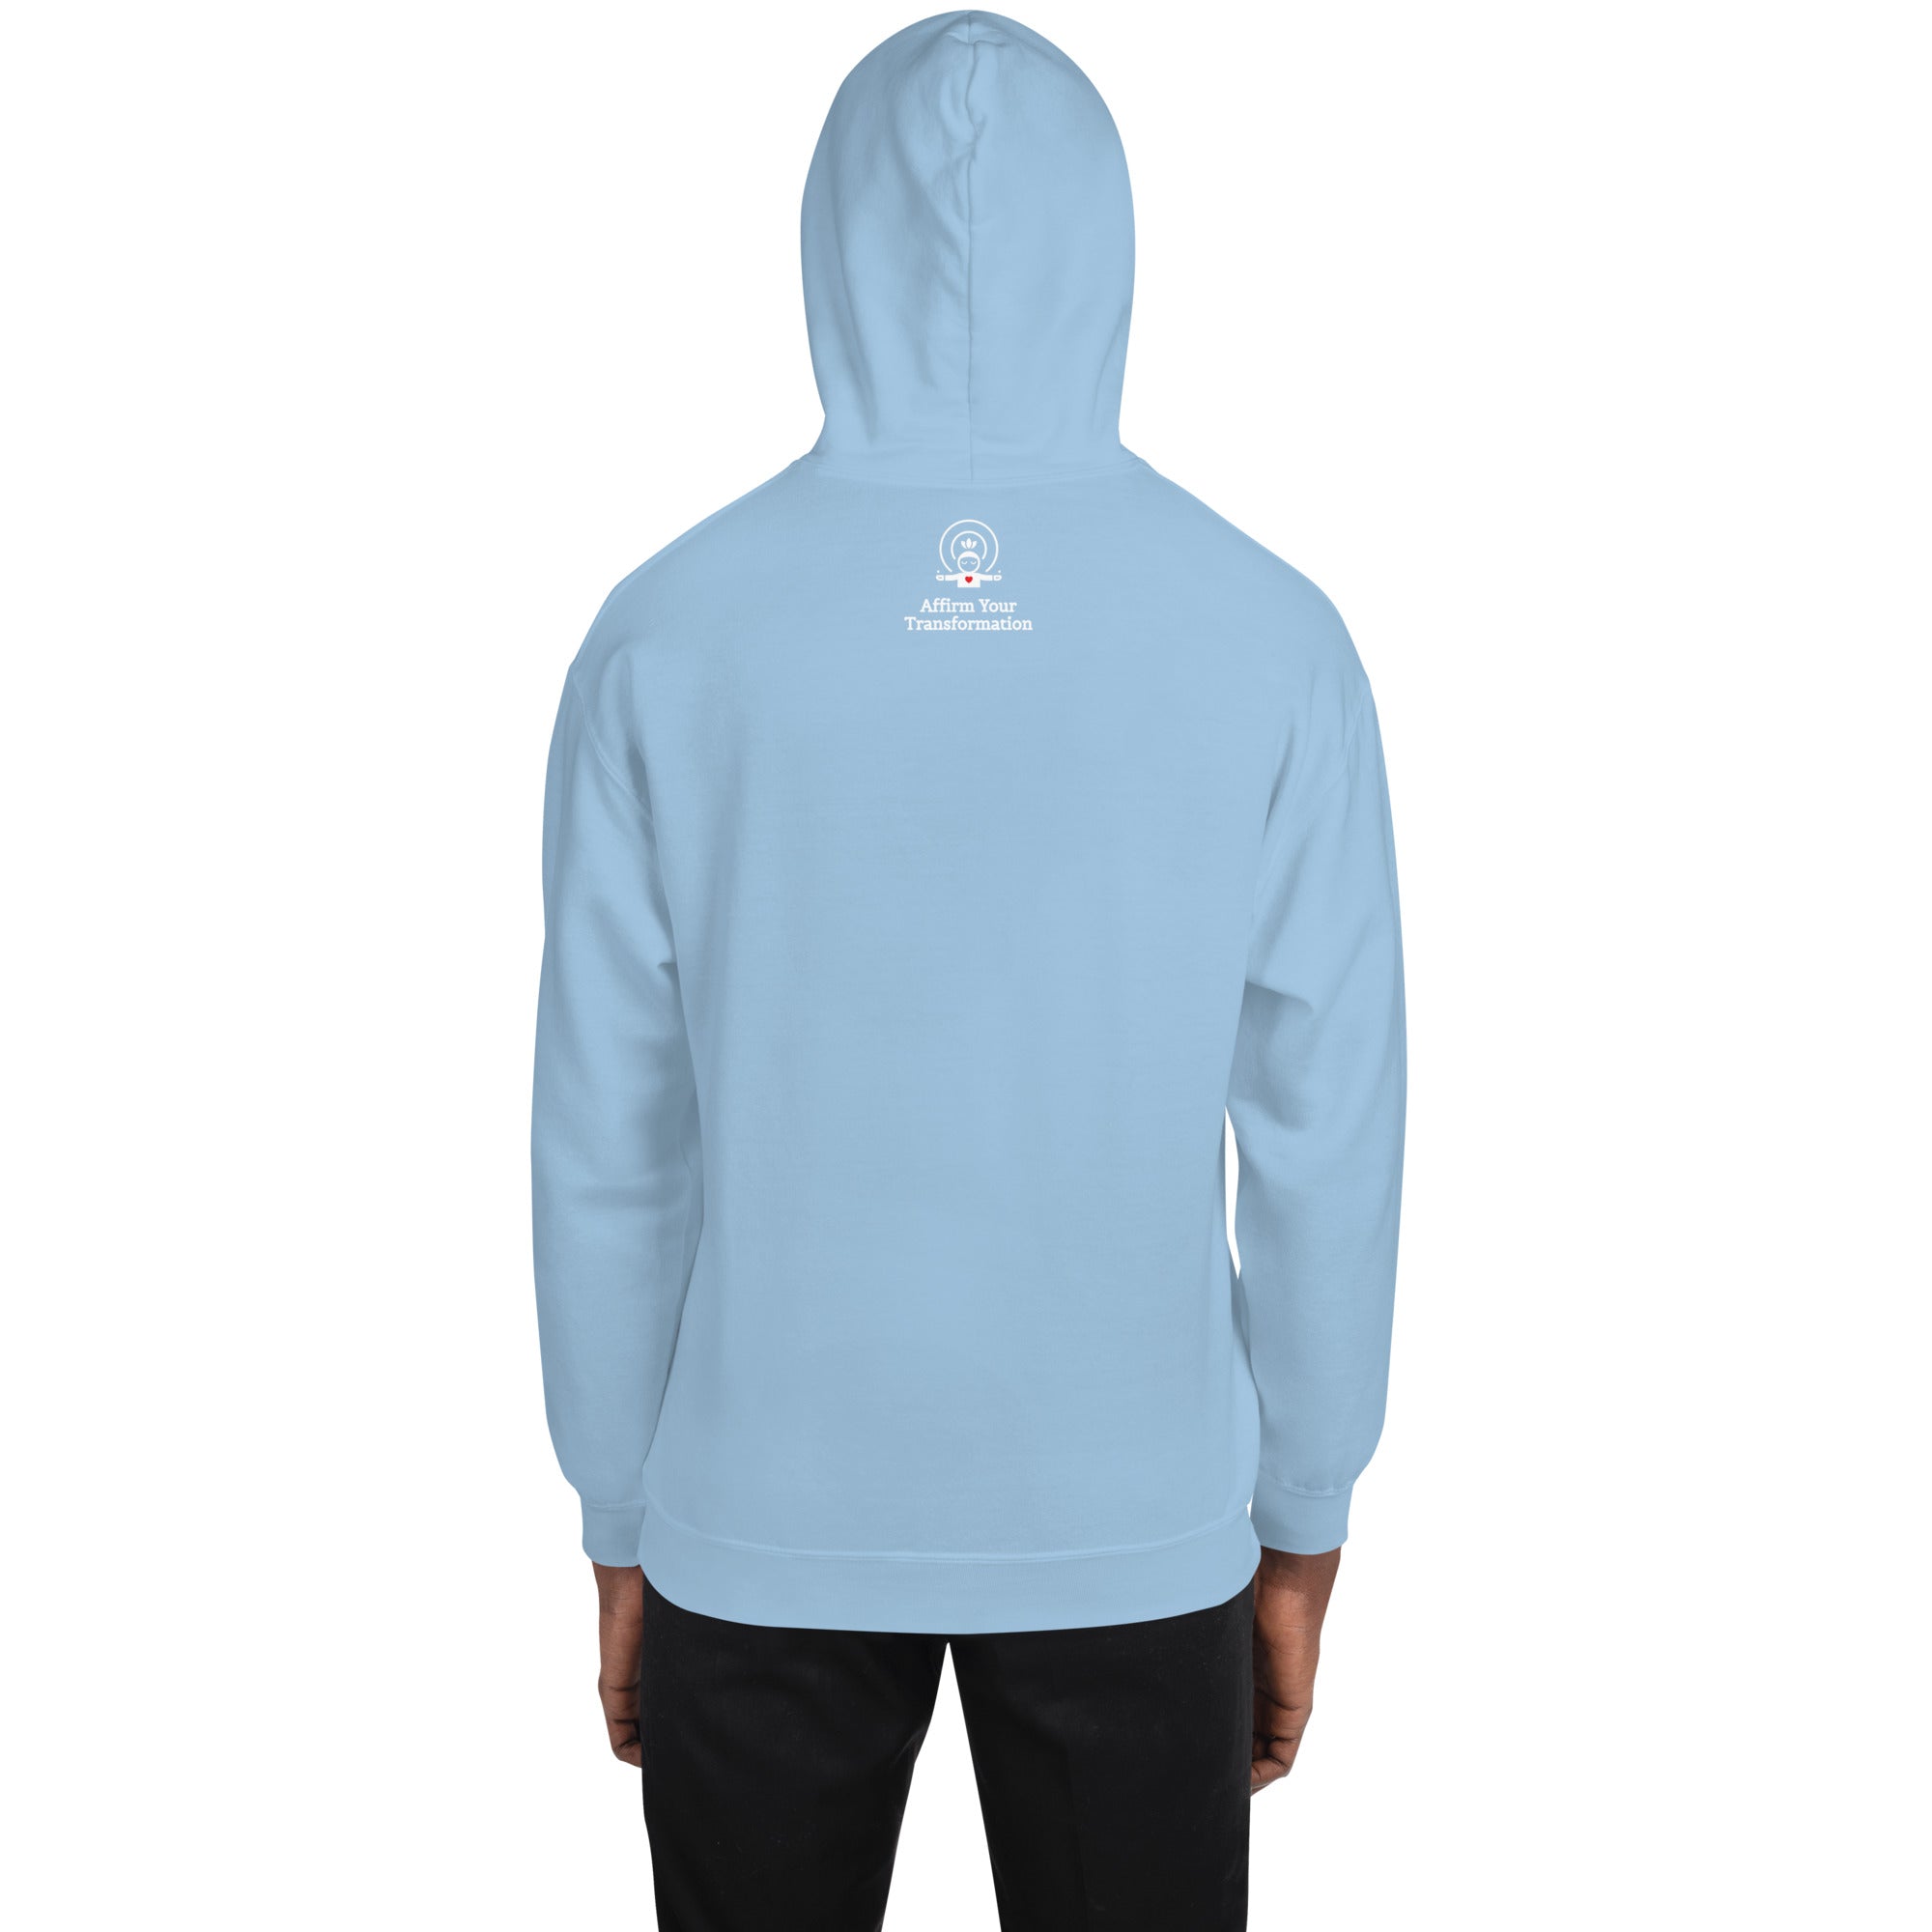 I TRUST GOD Mirror Affirmation Hoodie (White Text) - 9 COLORS!